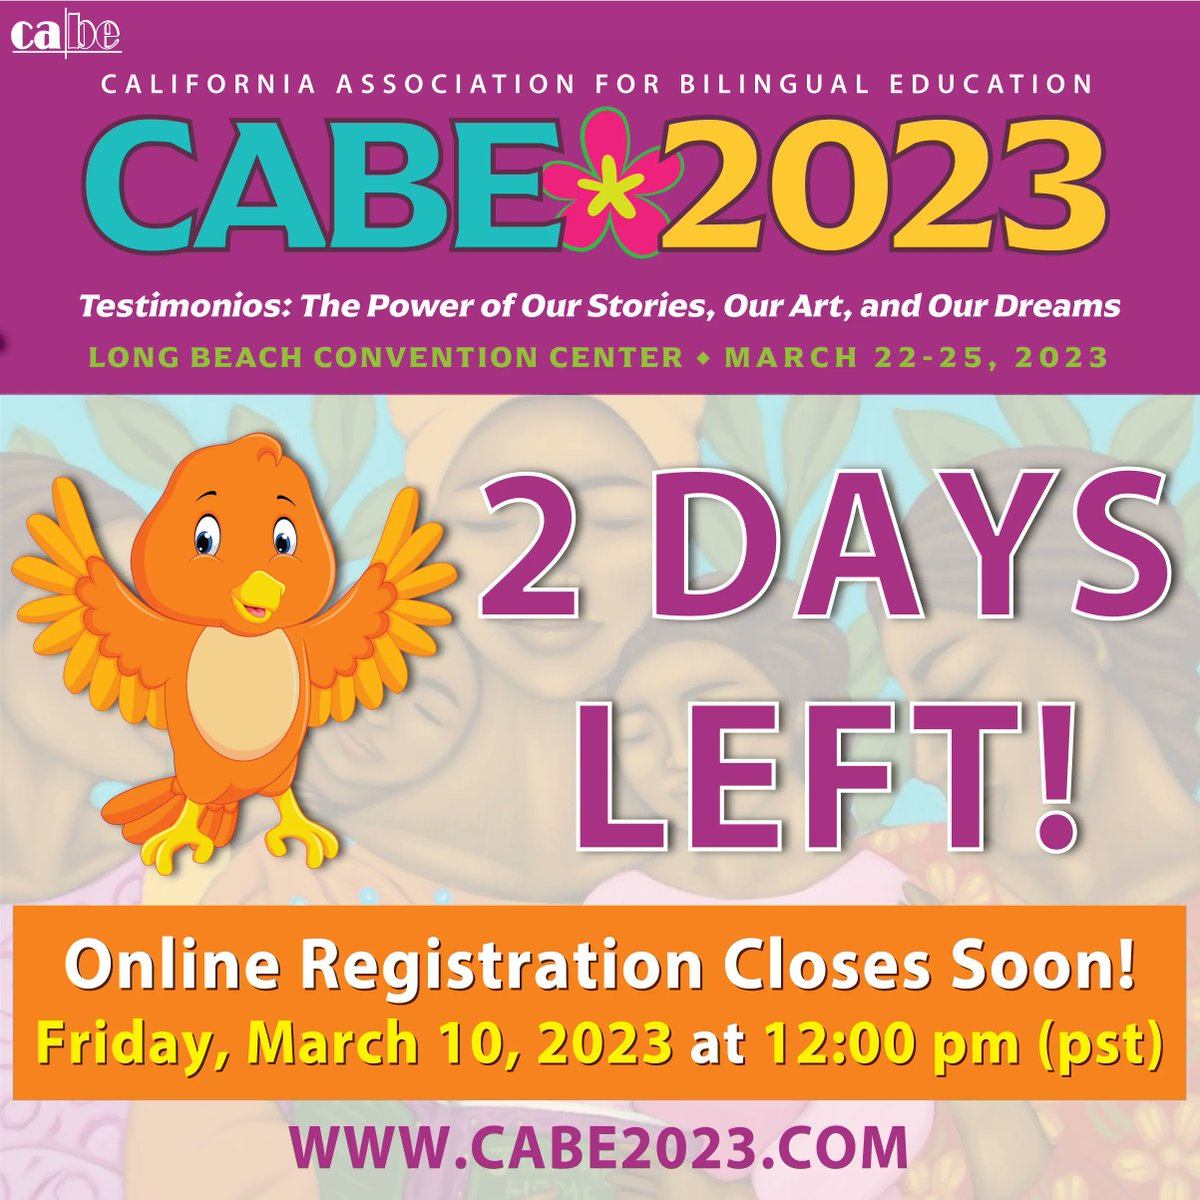 2 DAYS LEFT to register for CABE 2023! Register at: buff.ly/3W7WRhL 

#cabe2023 #cabe #registration #conference #bilingualresources #bilingualconference #callingallteachers #teachers #students #parents #parentresources #teacherresources #studentresources #administrators